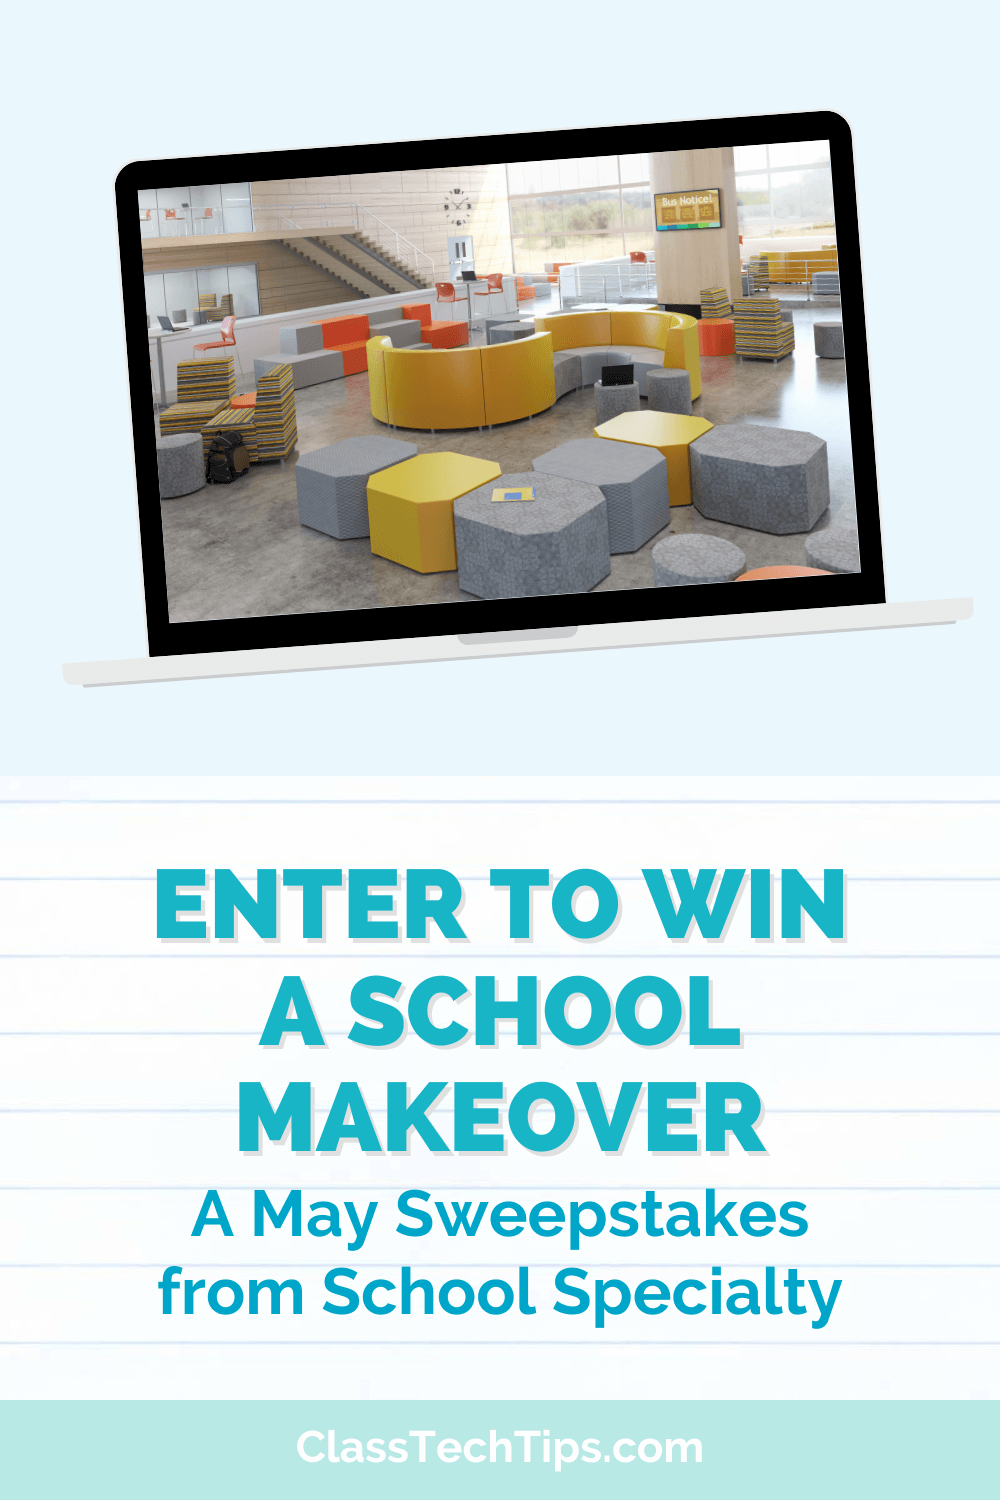 Promotional graphic inviting entries to win a School Specialty makeover worth $50,000, featuring a modern and colorful classroom design on a digital screen.